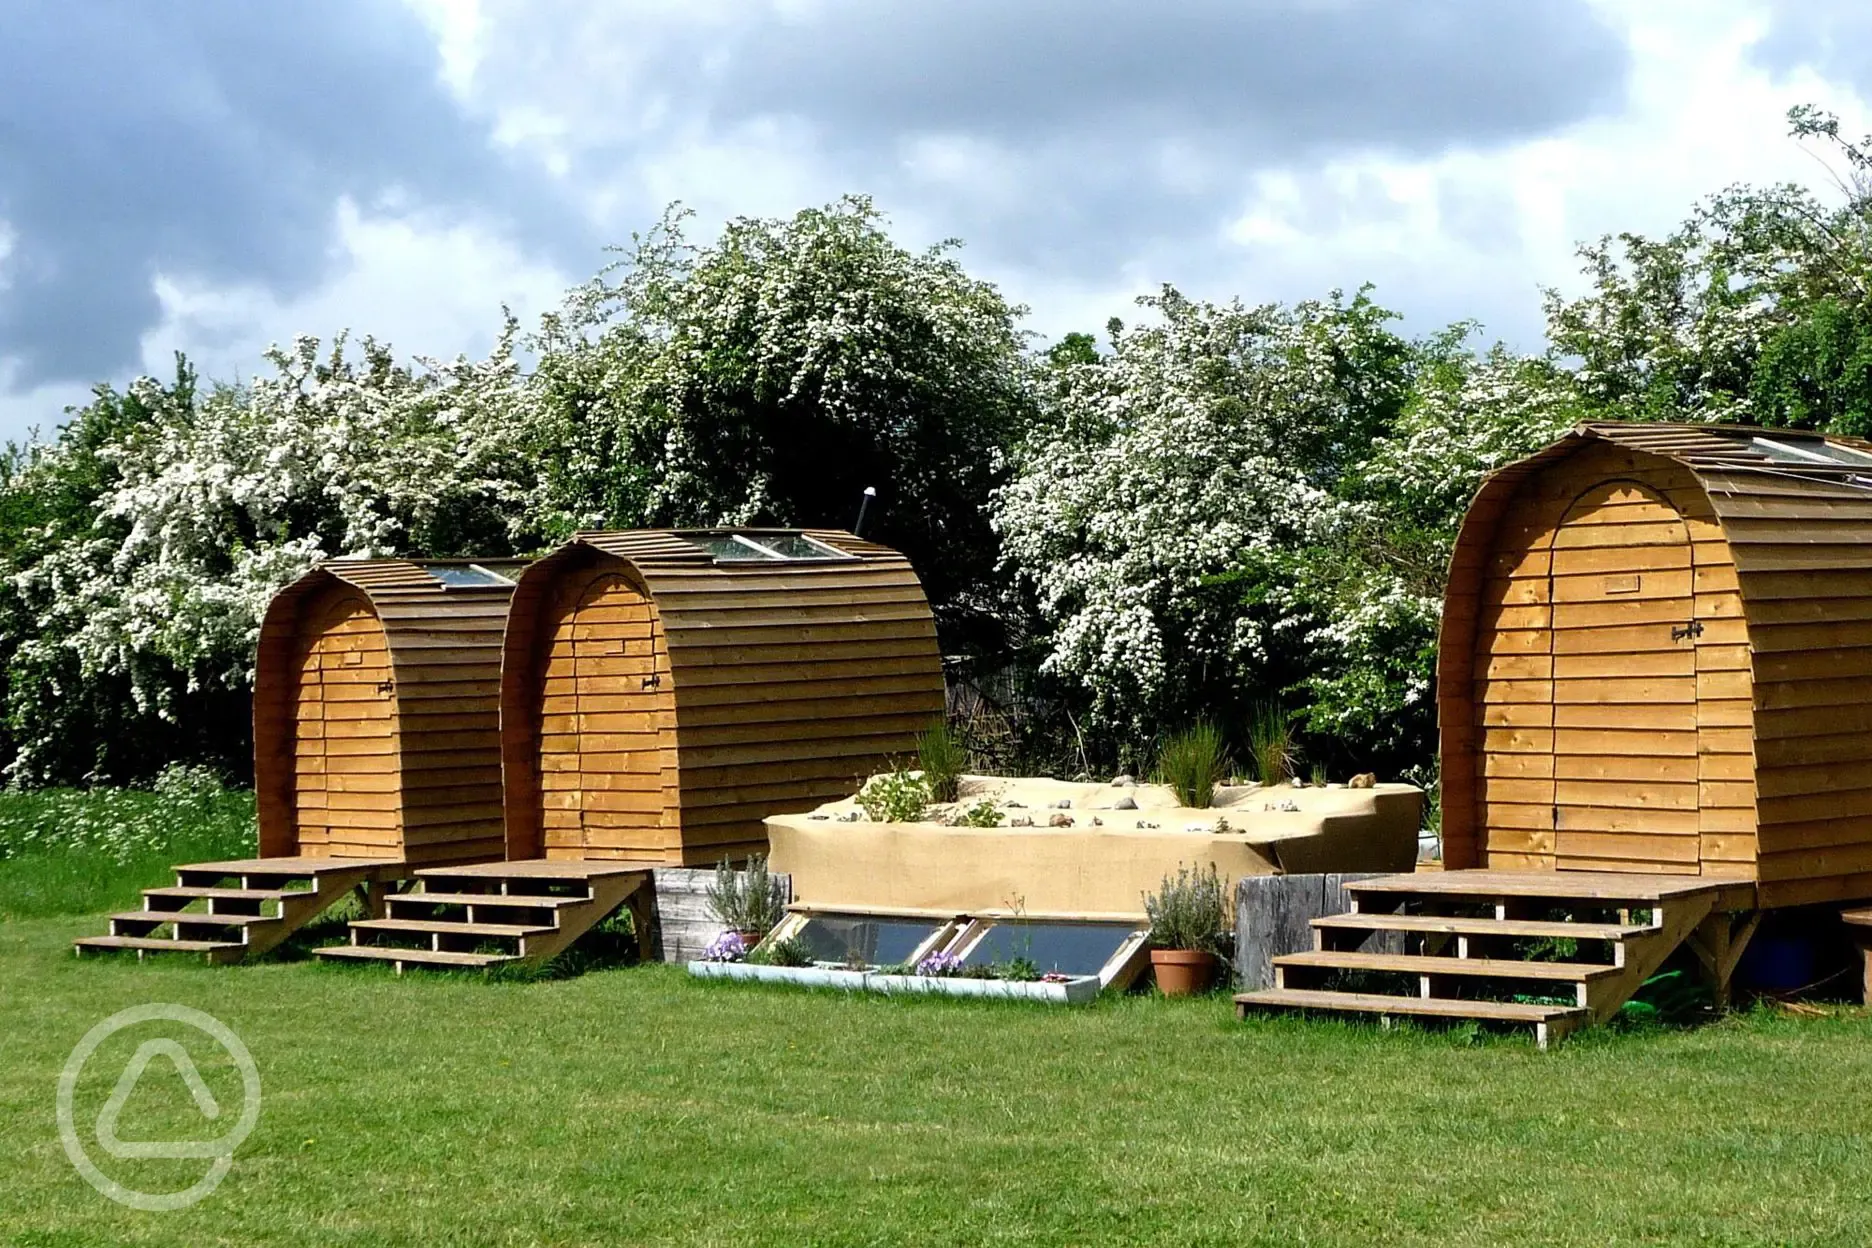 Compost loos and showers